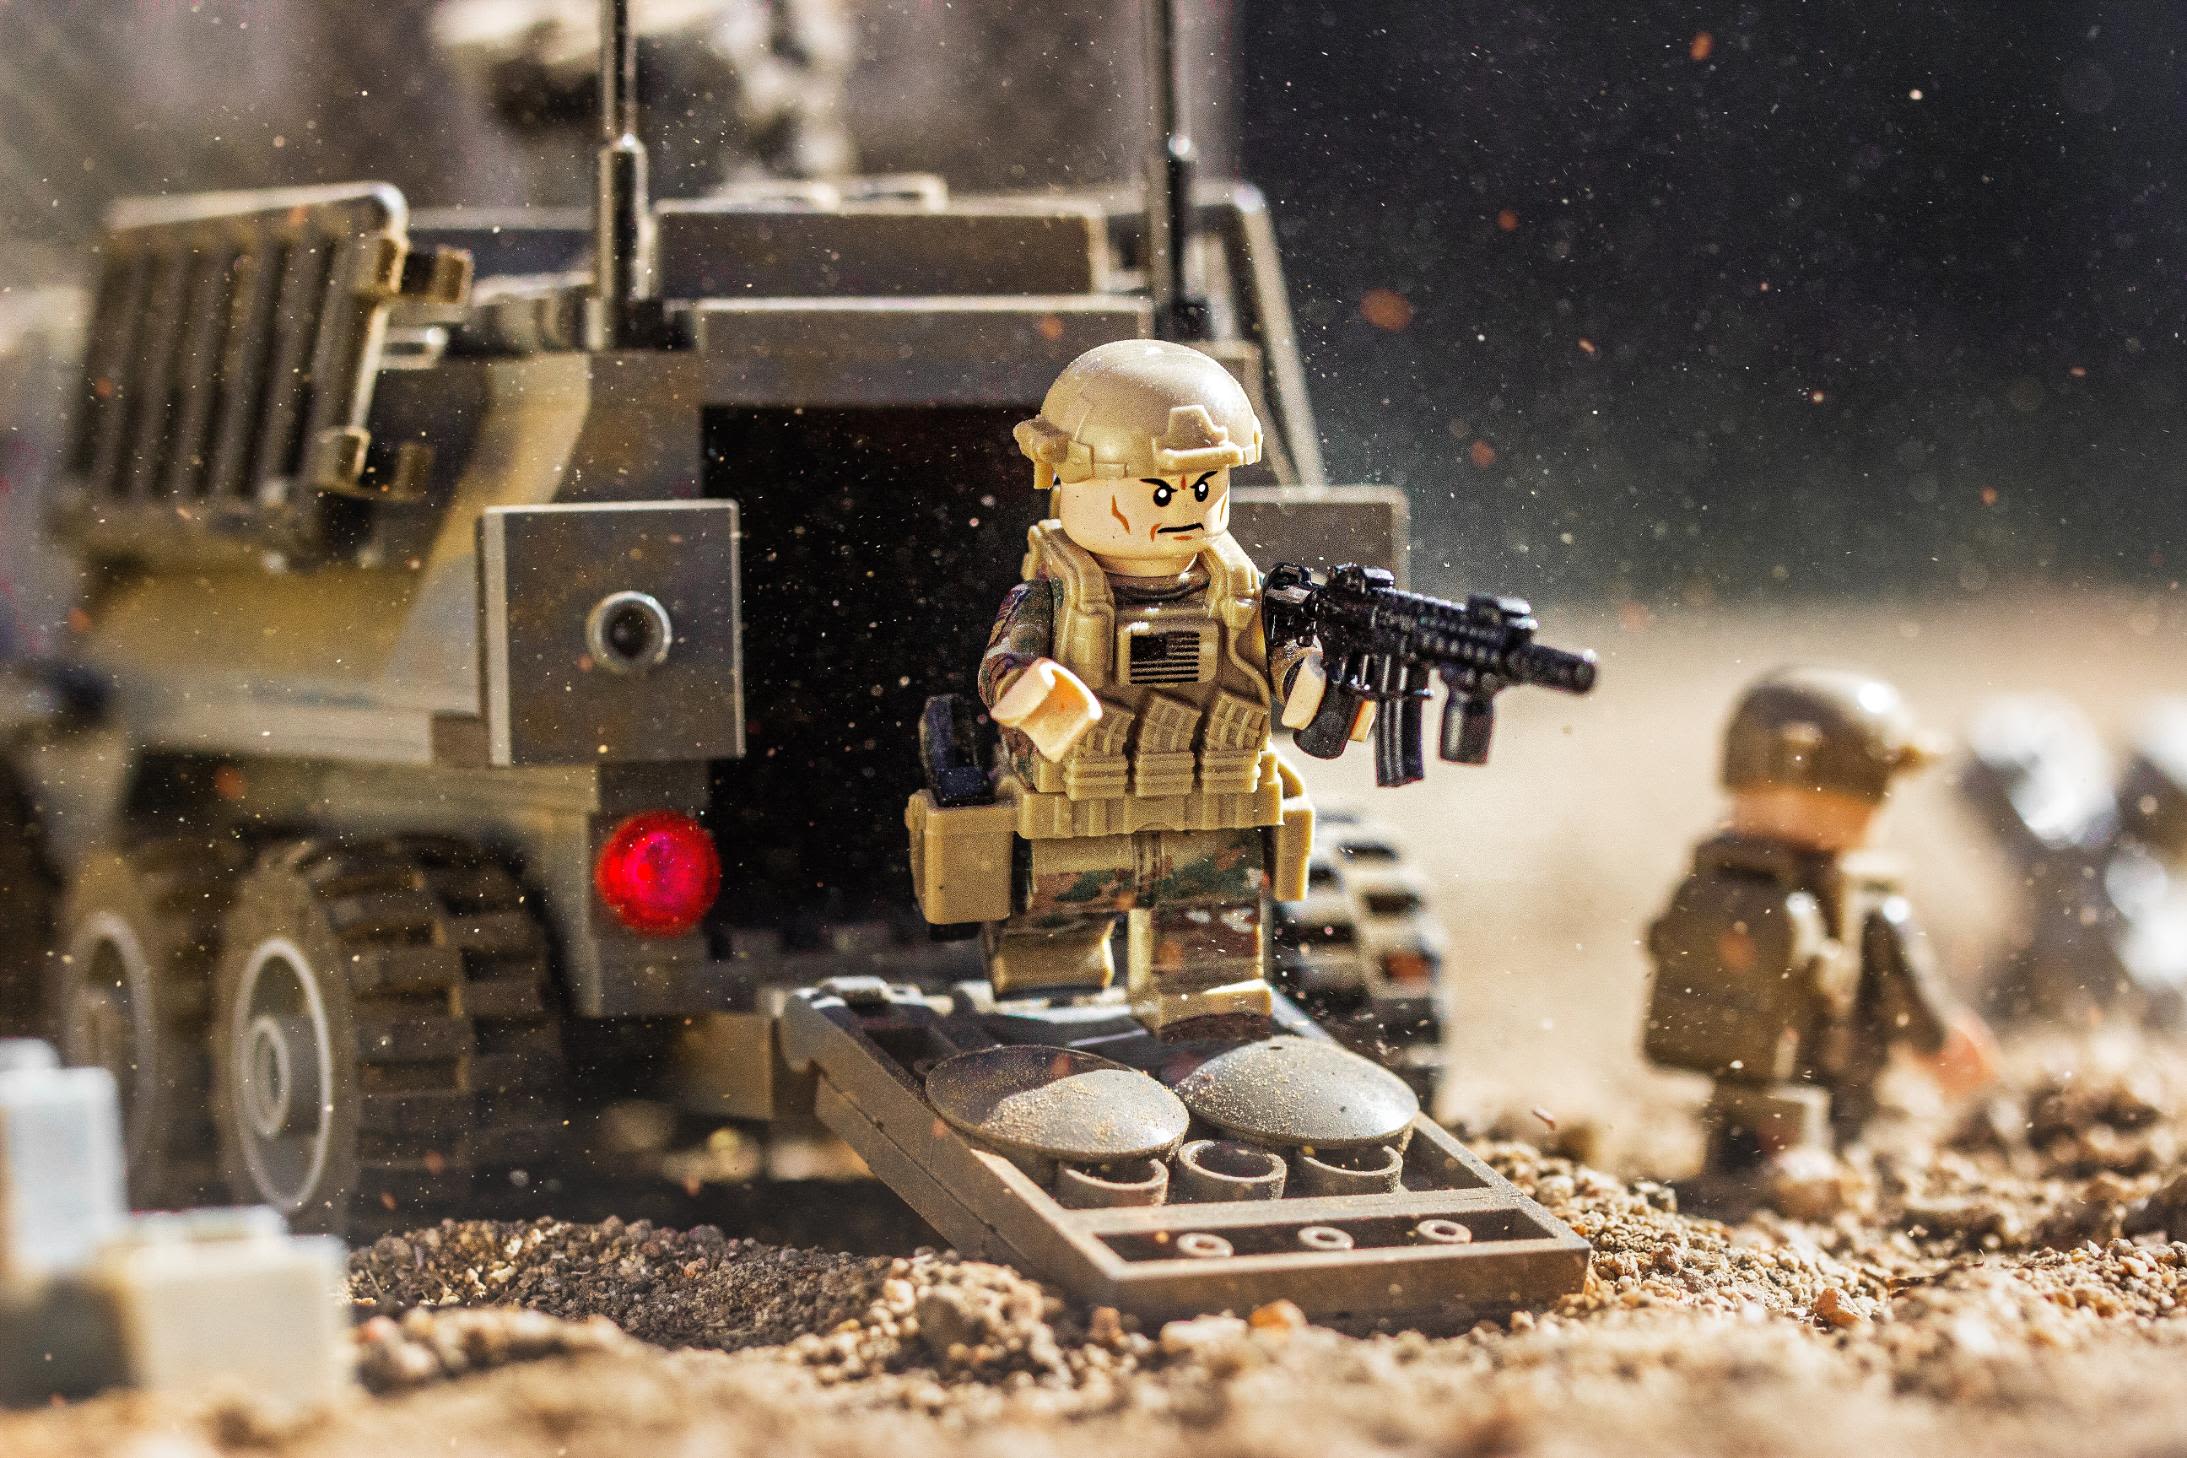 LEGO won't modern war machines, but others are picking up the pieces |